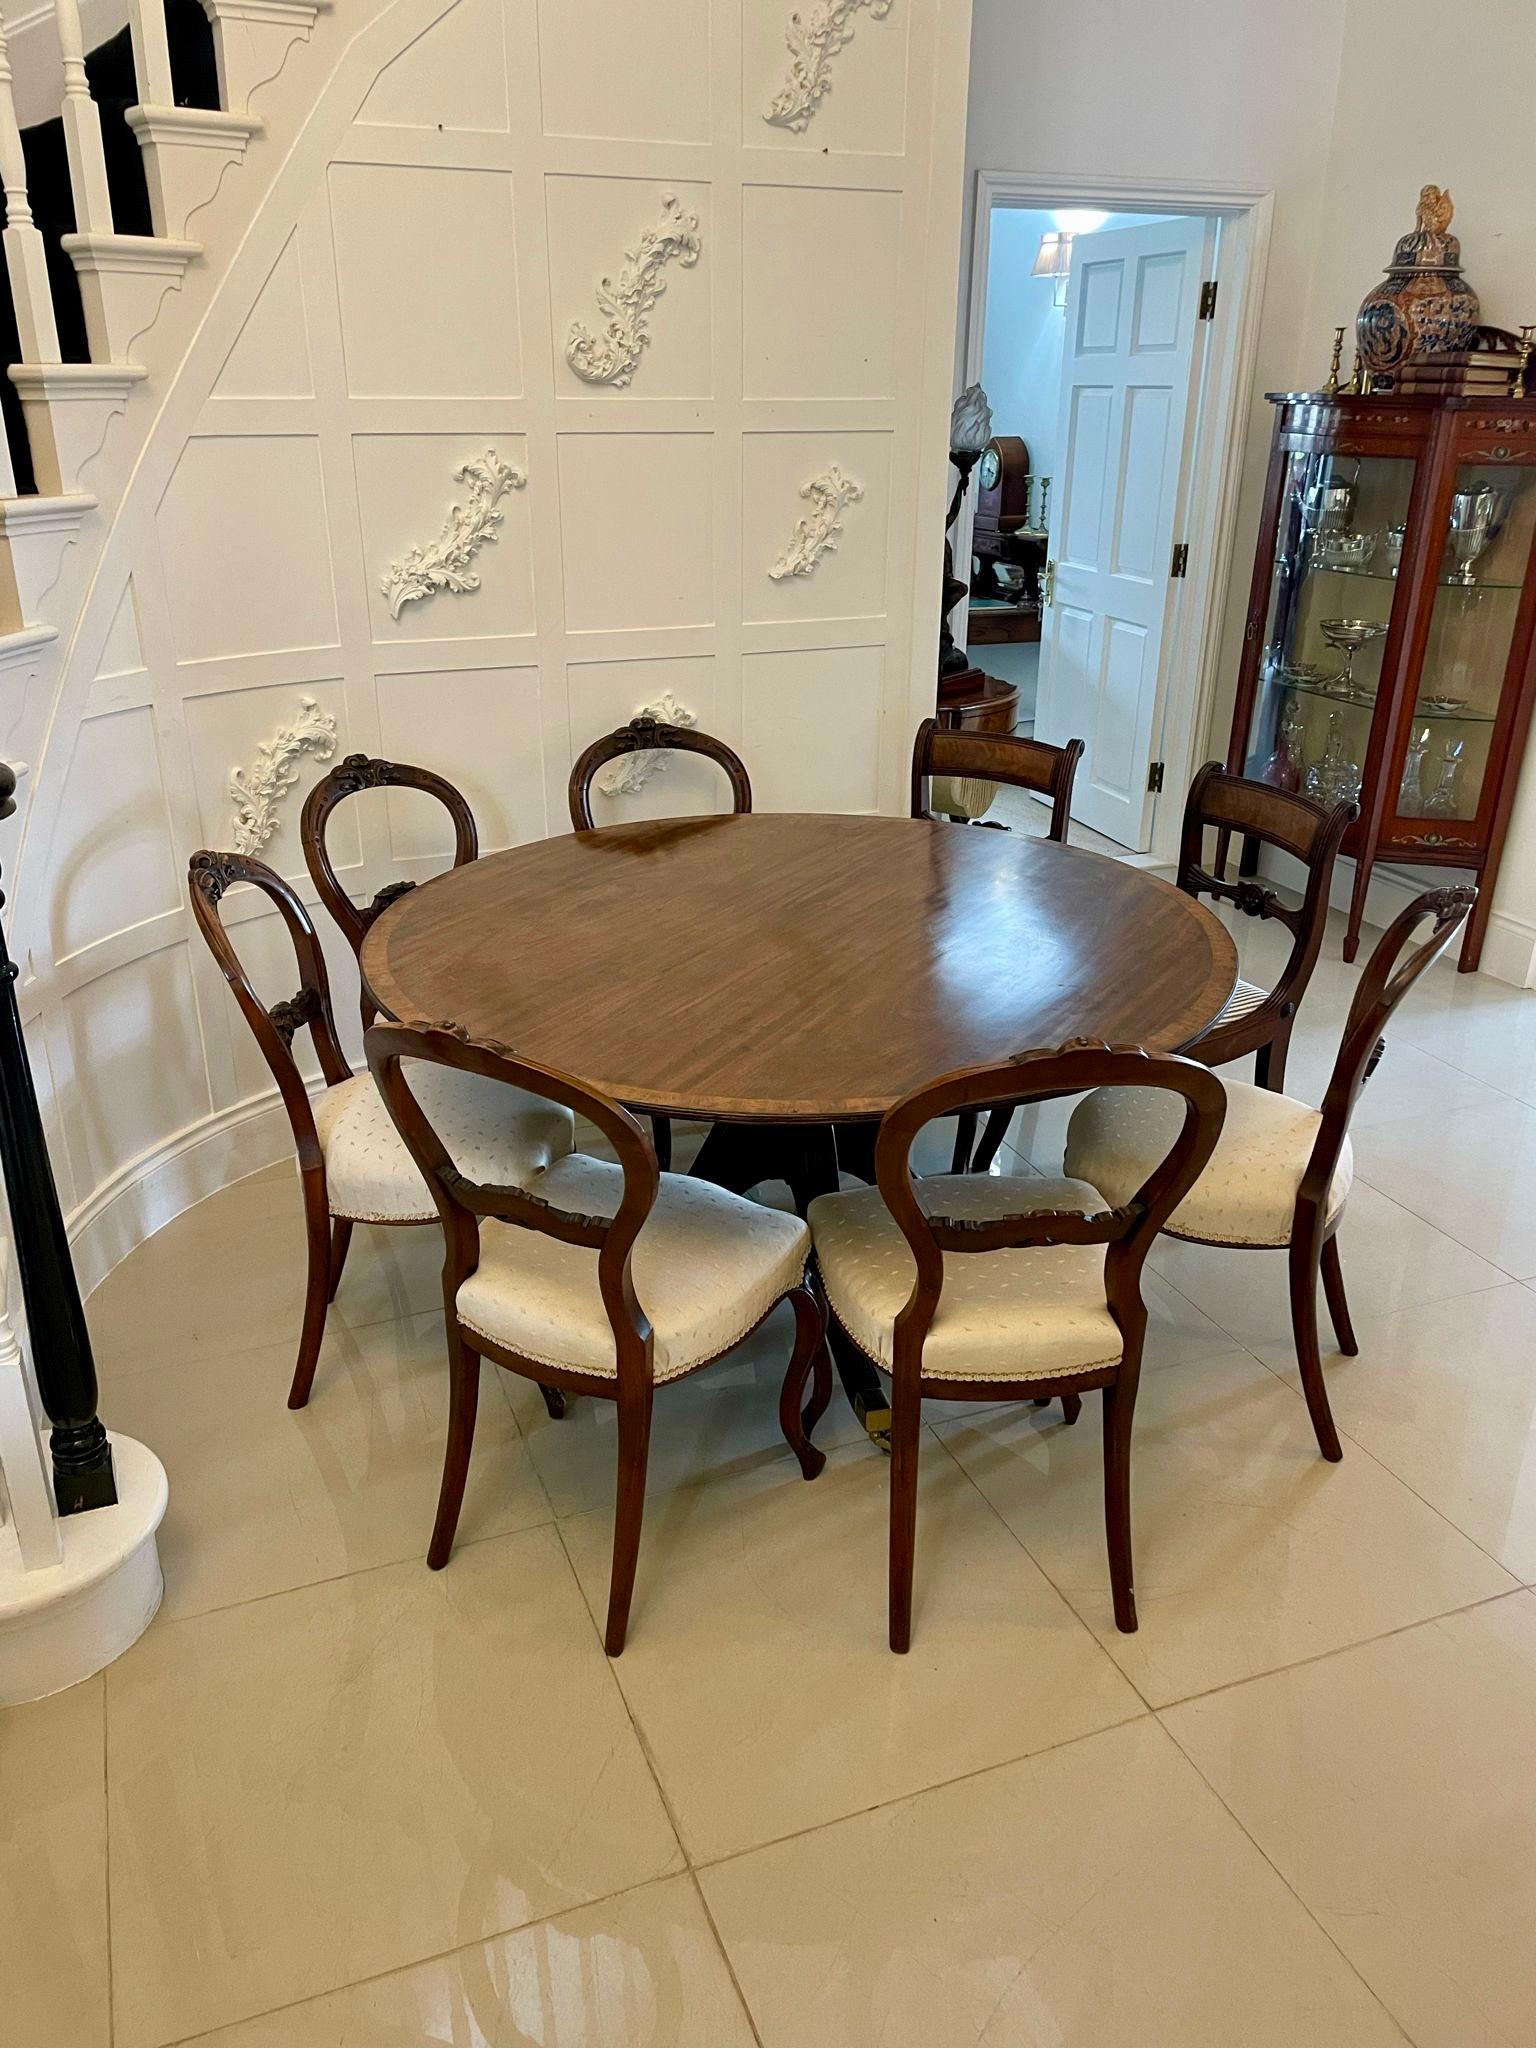 Antique George III quality figured mahogany circular dining table having a quality figured mahogany satinwood crossbanded circular top supported by a turned pedestal column standing on four reeded sabre legs with original brass castors


A handsome